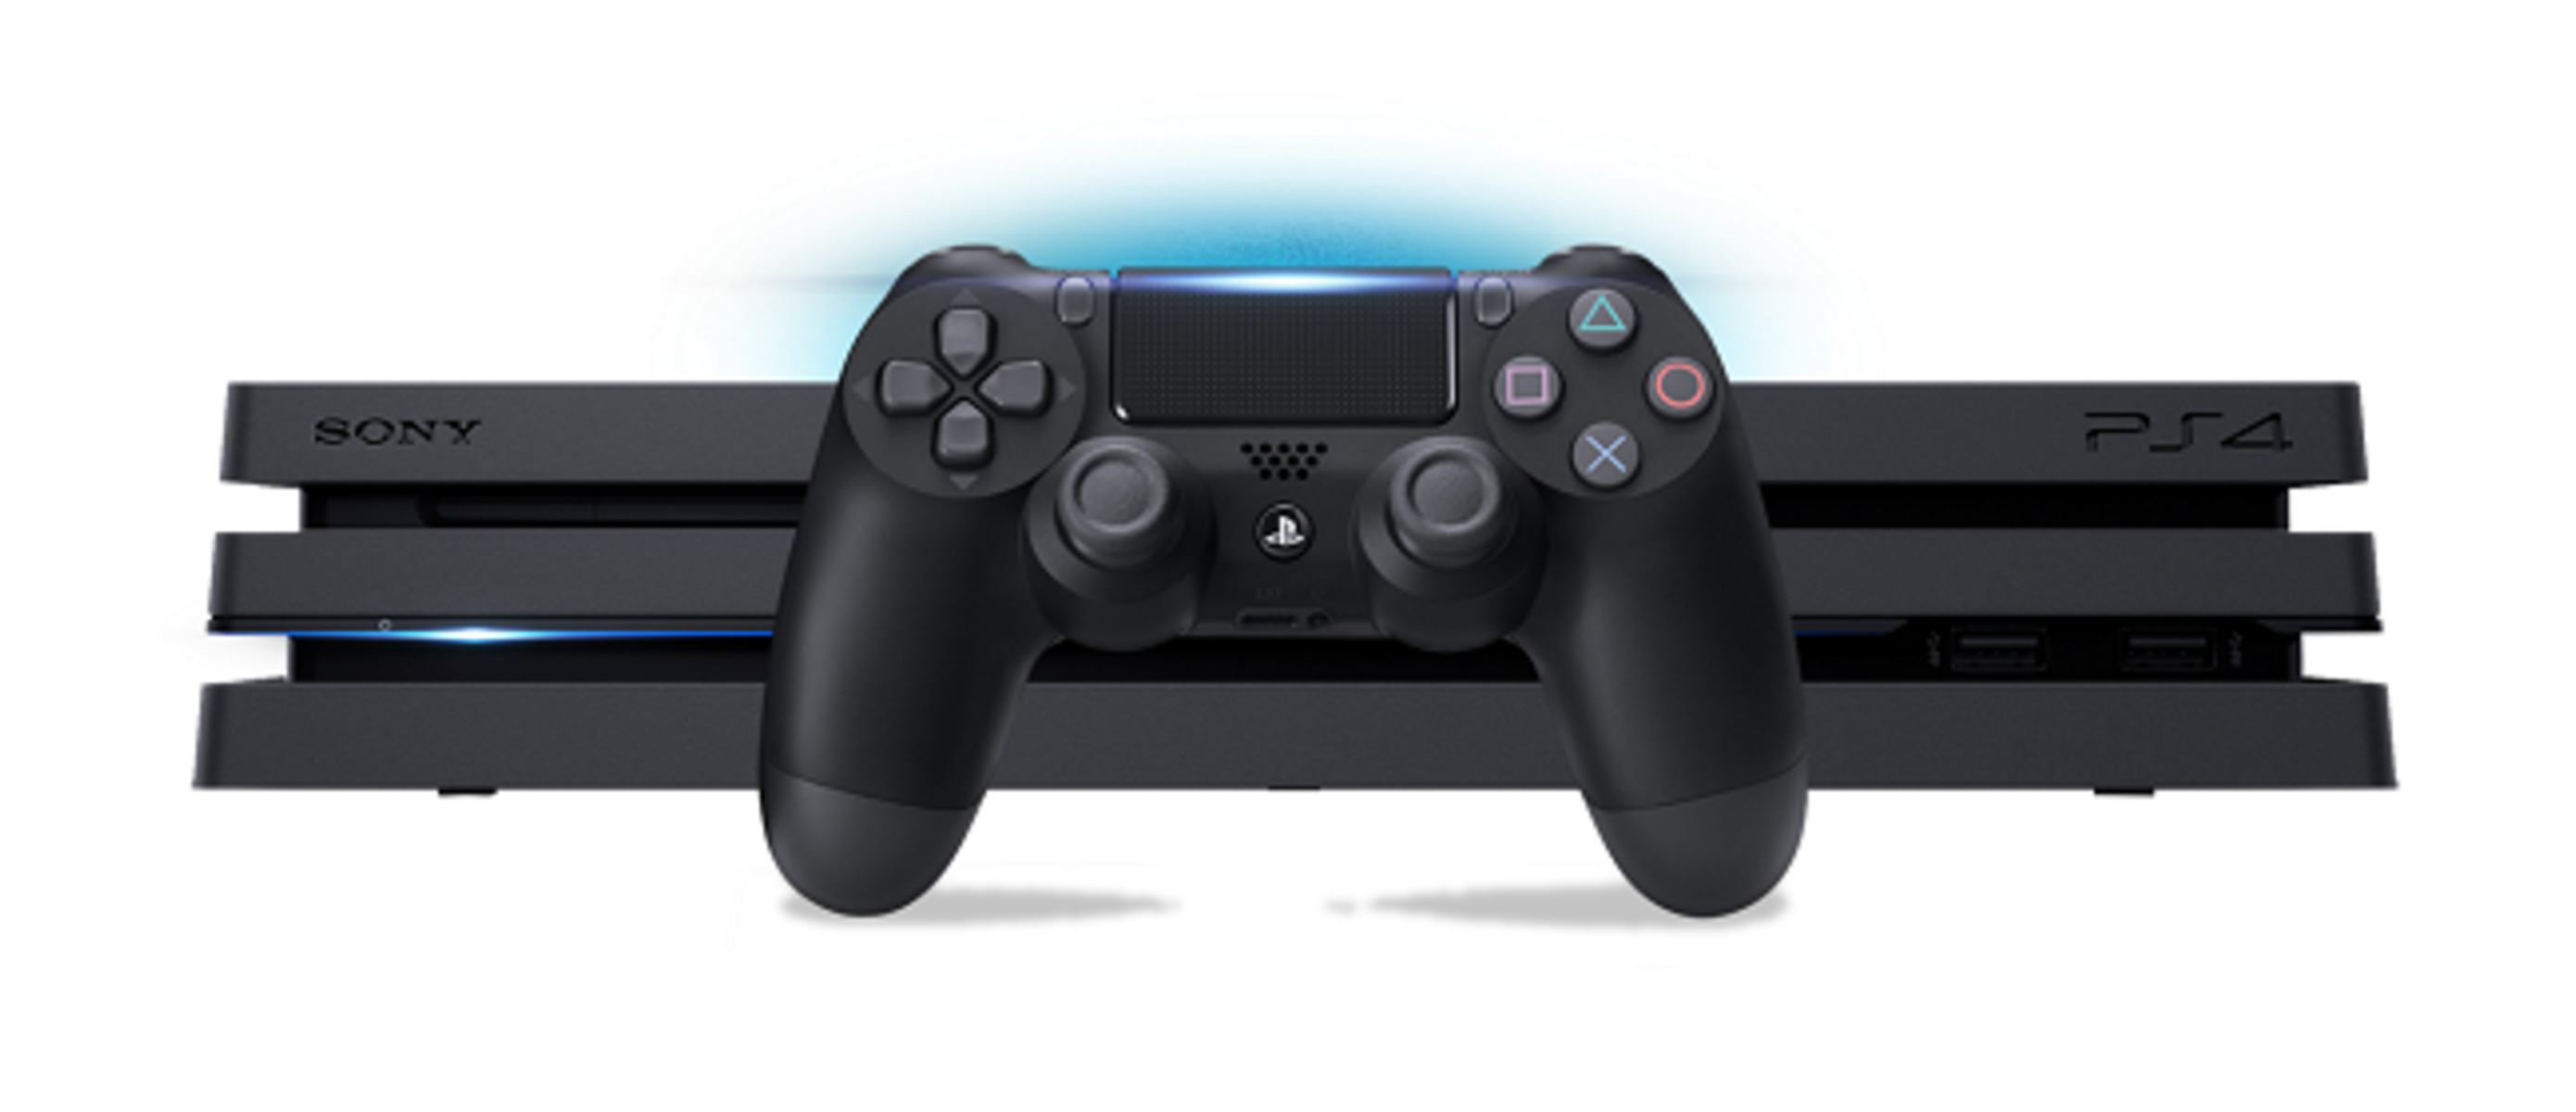 Ps4 общее. Console PLAYSTATION ps4. Ps4 Pro 500gb. PLAYSTATION 4 Pro 1tb. Приставка Sony PLAYSTATION 5 PNG.